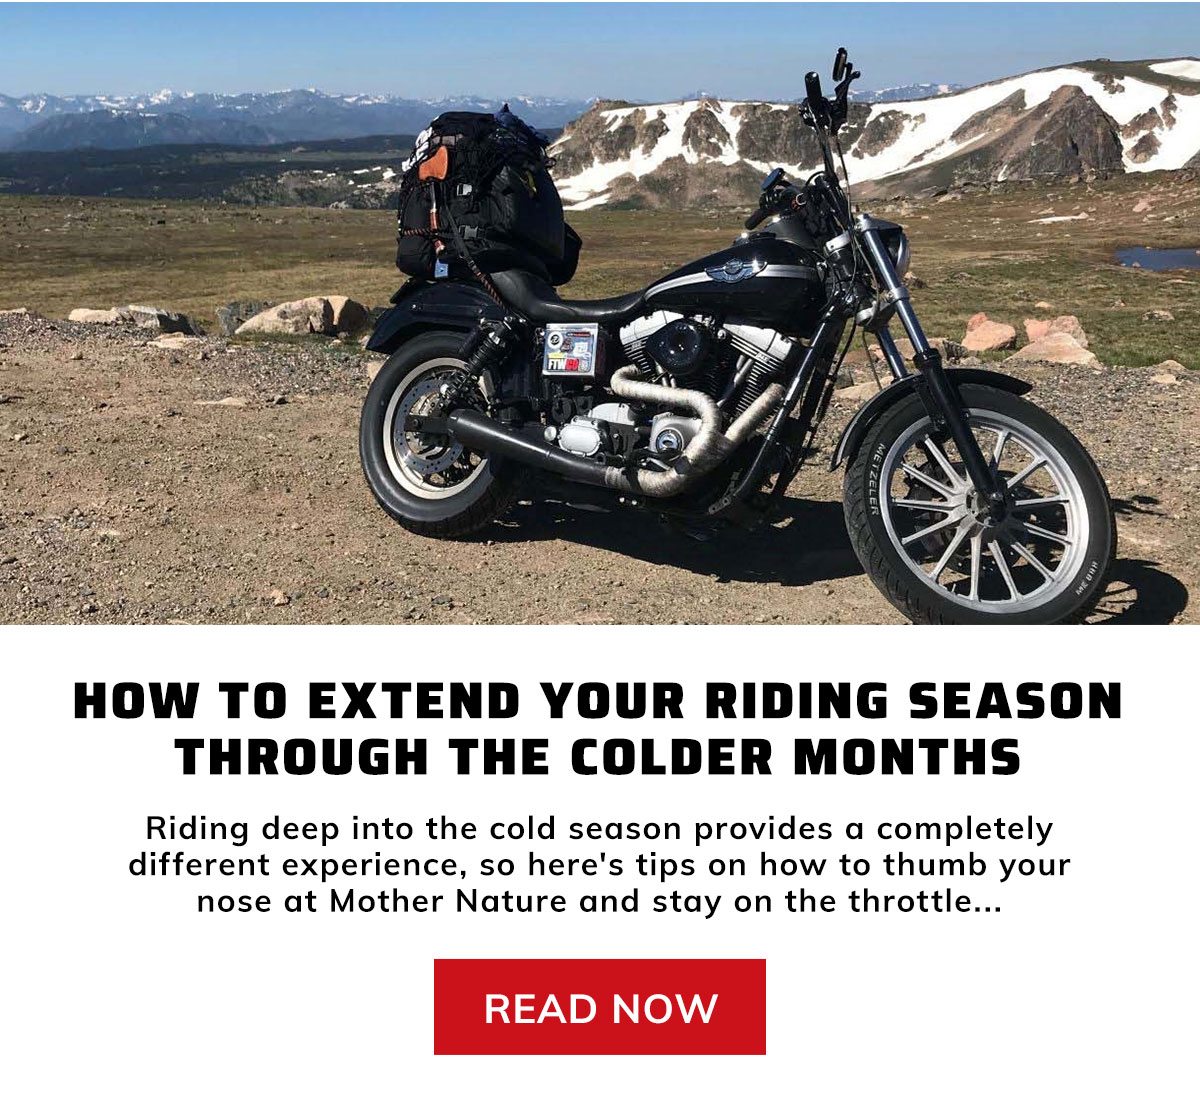 How to extend your riding season through the colder months